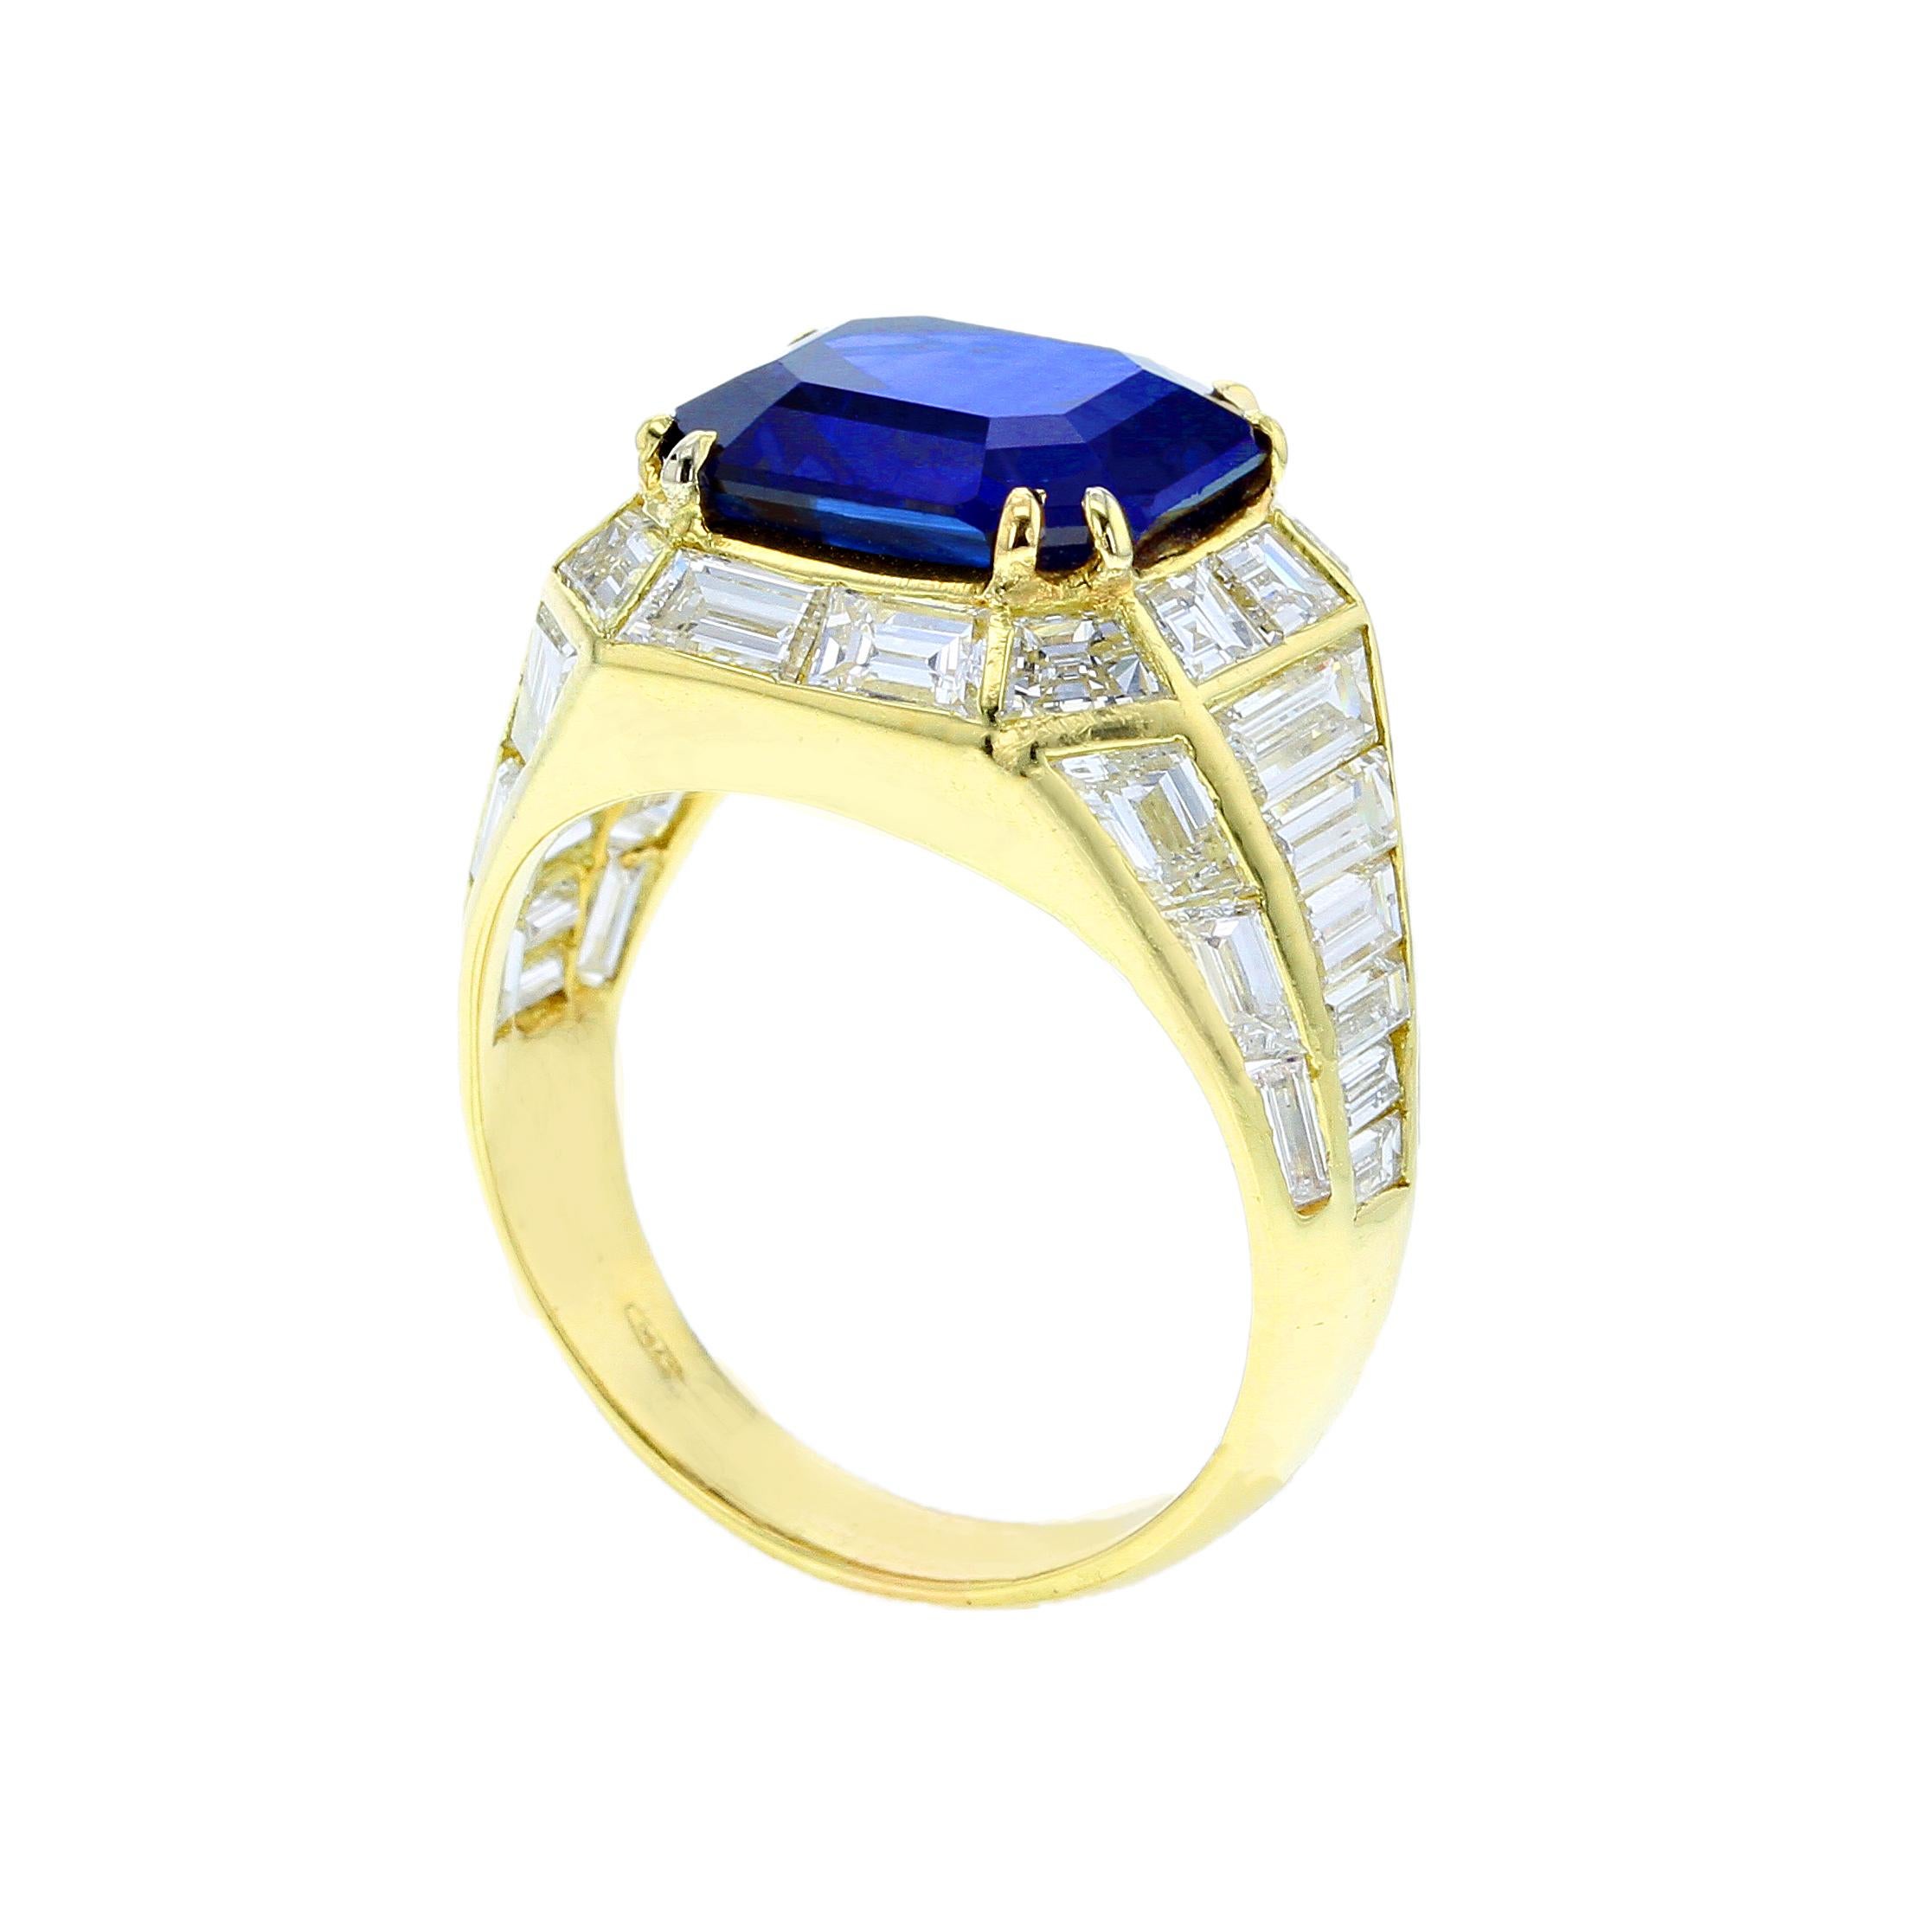 A chic sapphire and diamond ring, centered with an approximately five carat, natural no-heat rectangular step-cut Burma Sapphire, accented with a single row of tapered baguettes, flowing towards the shoulders and tapered sides; stamped 750. The